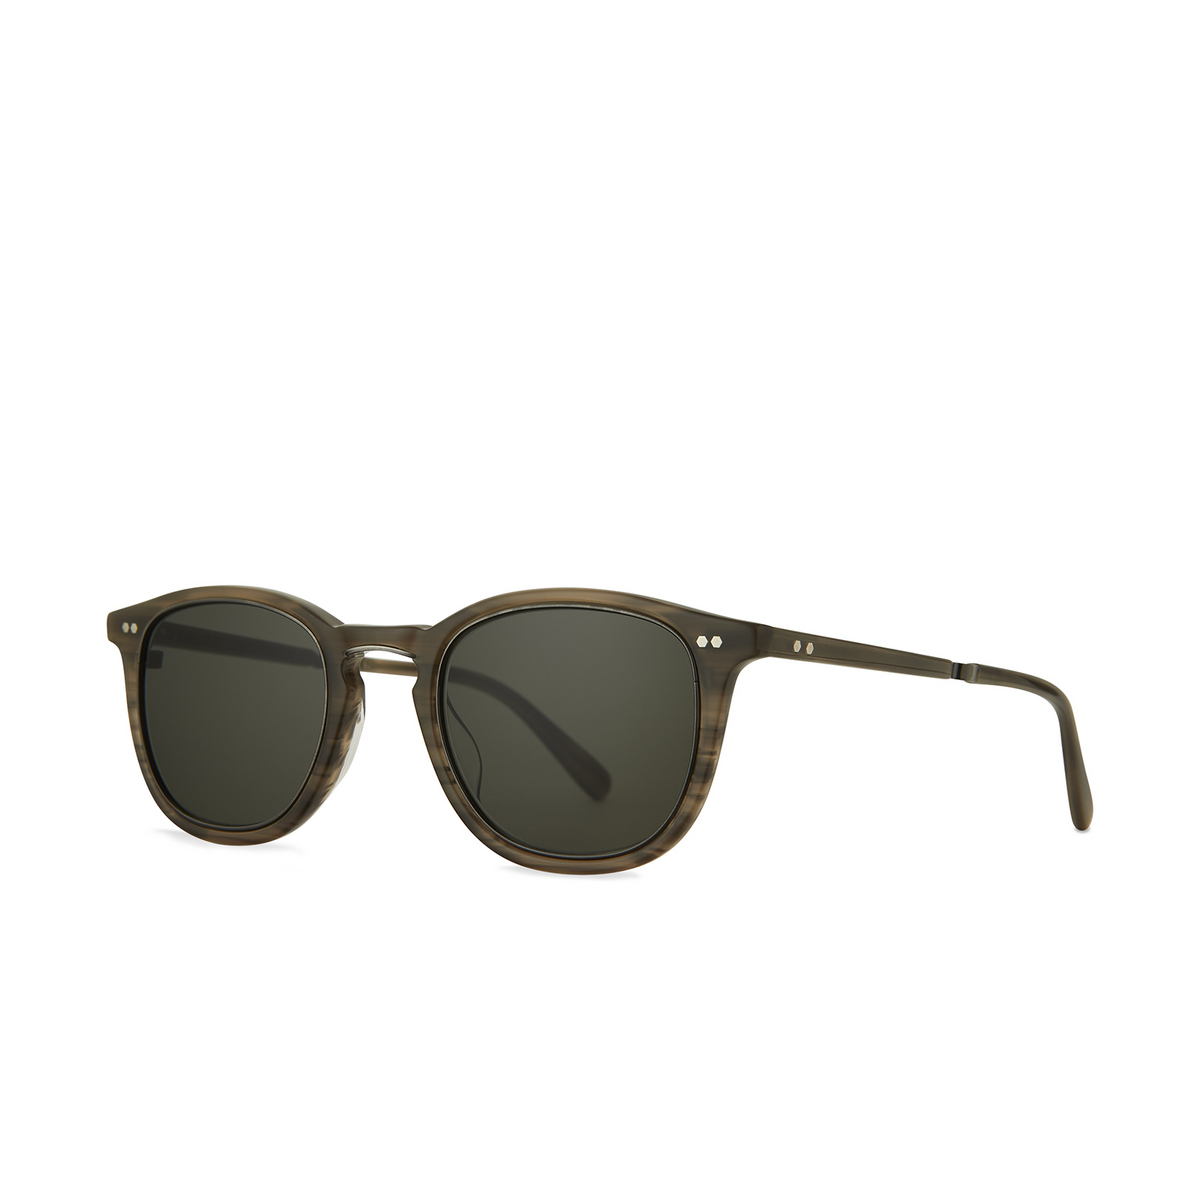 Mr. Leight® Square Sunglasses: Coopers S color Greywood - Pewter / G15 GW-PW/G15 - three-quarters view.